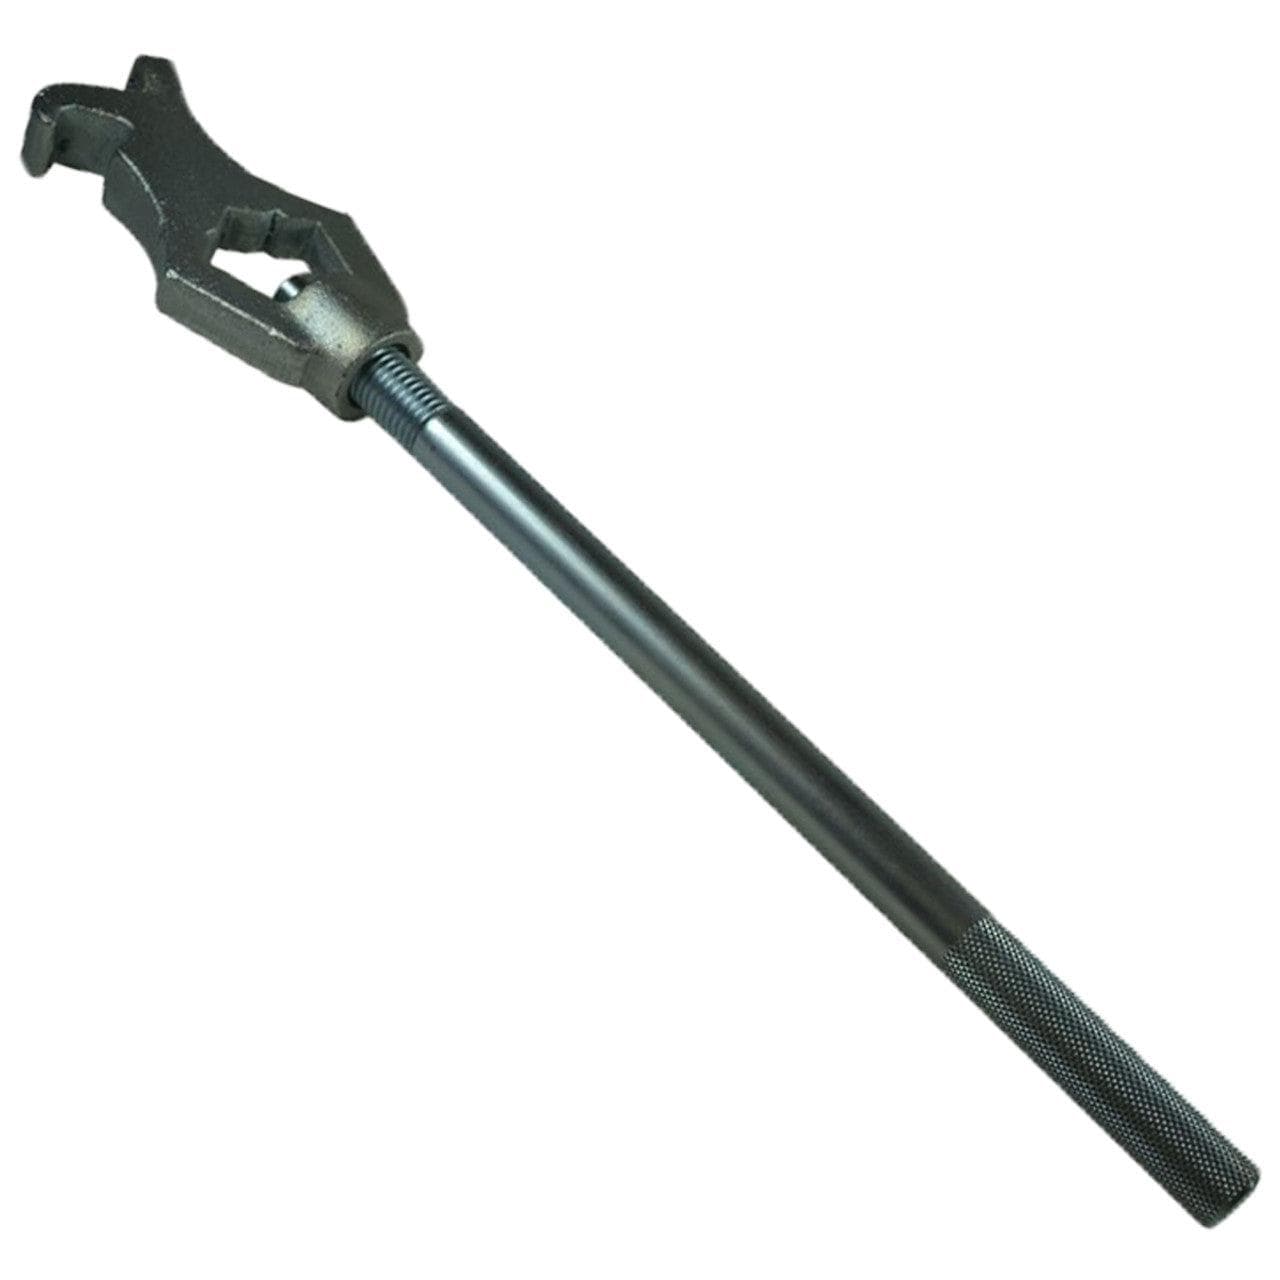 Universal Adjustable Hydrant Wrench